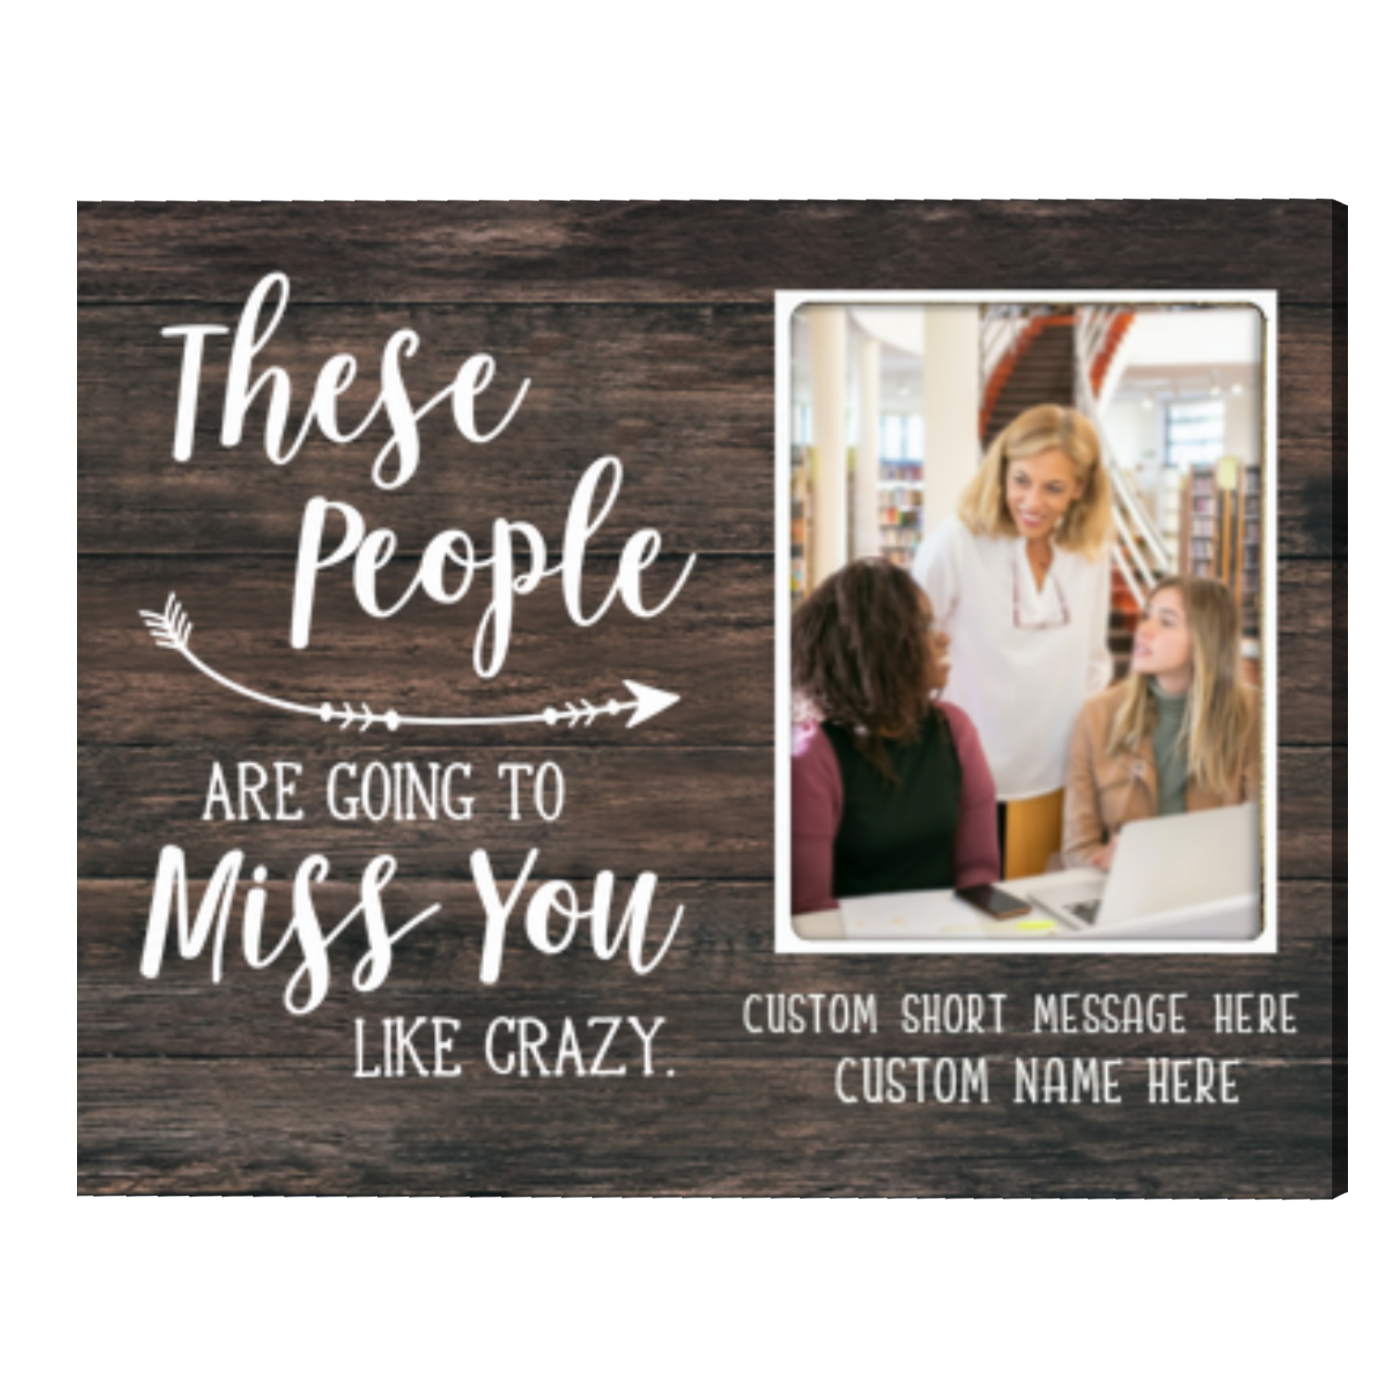 Personalized Going Away Gift Coworker Friend Canvas, Best Work Friends  Gift, Colleague Farewell Gift - Best Personalized Gifts For Everyone